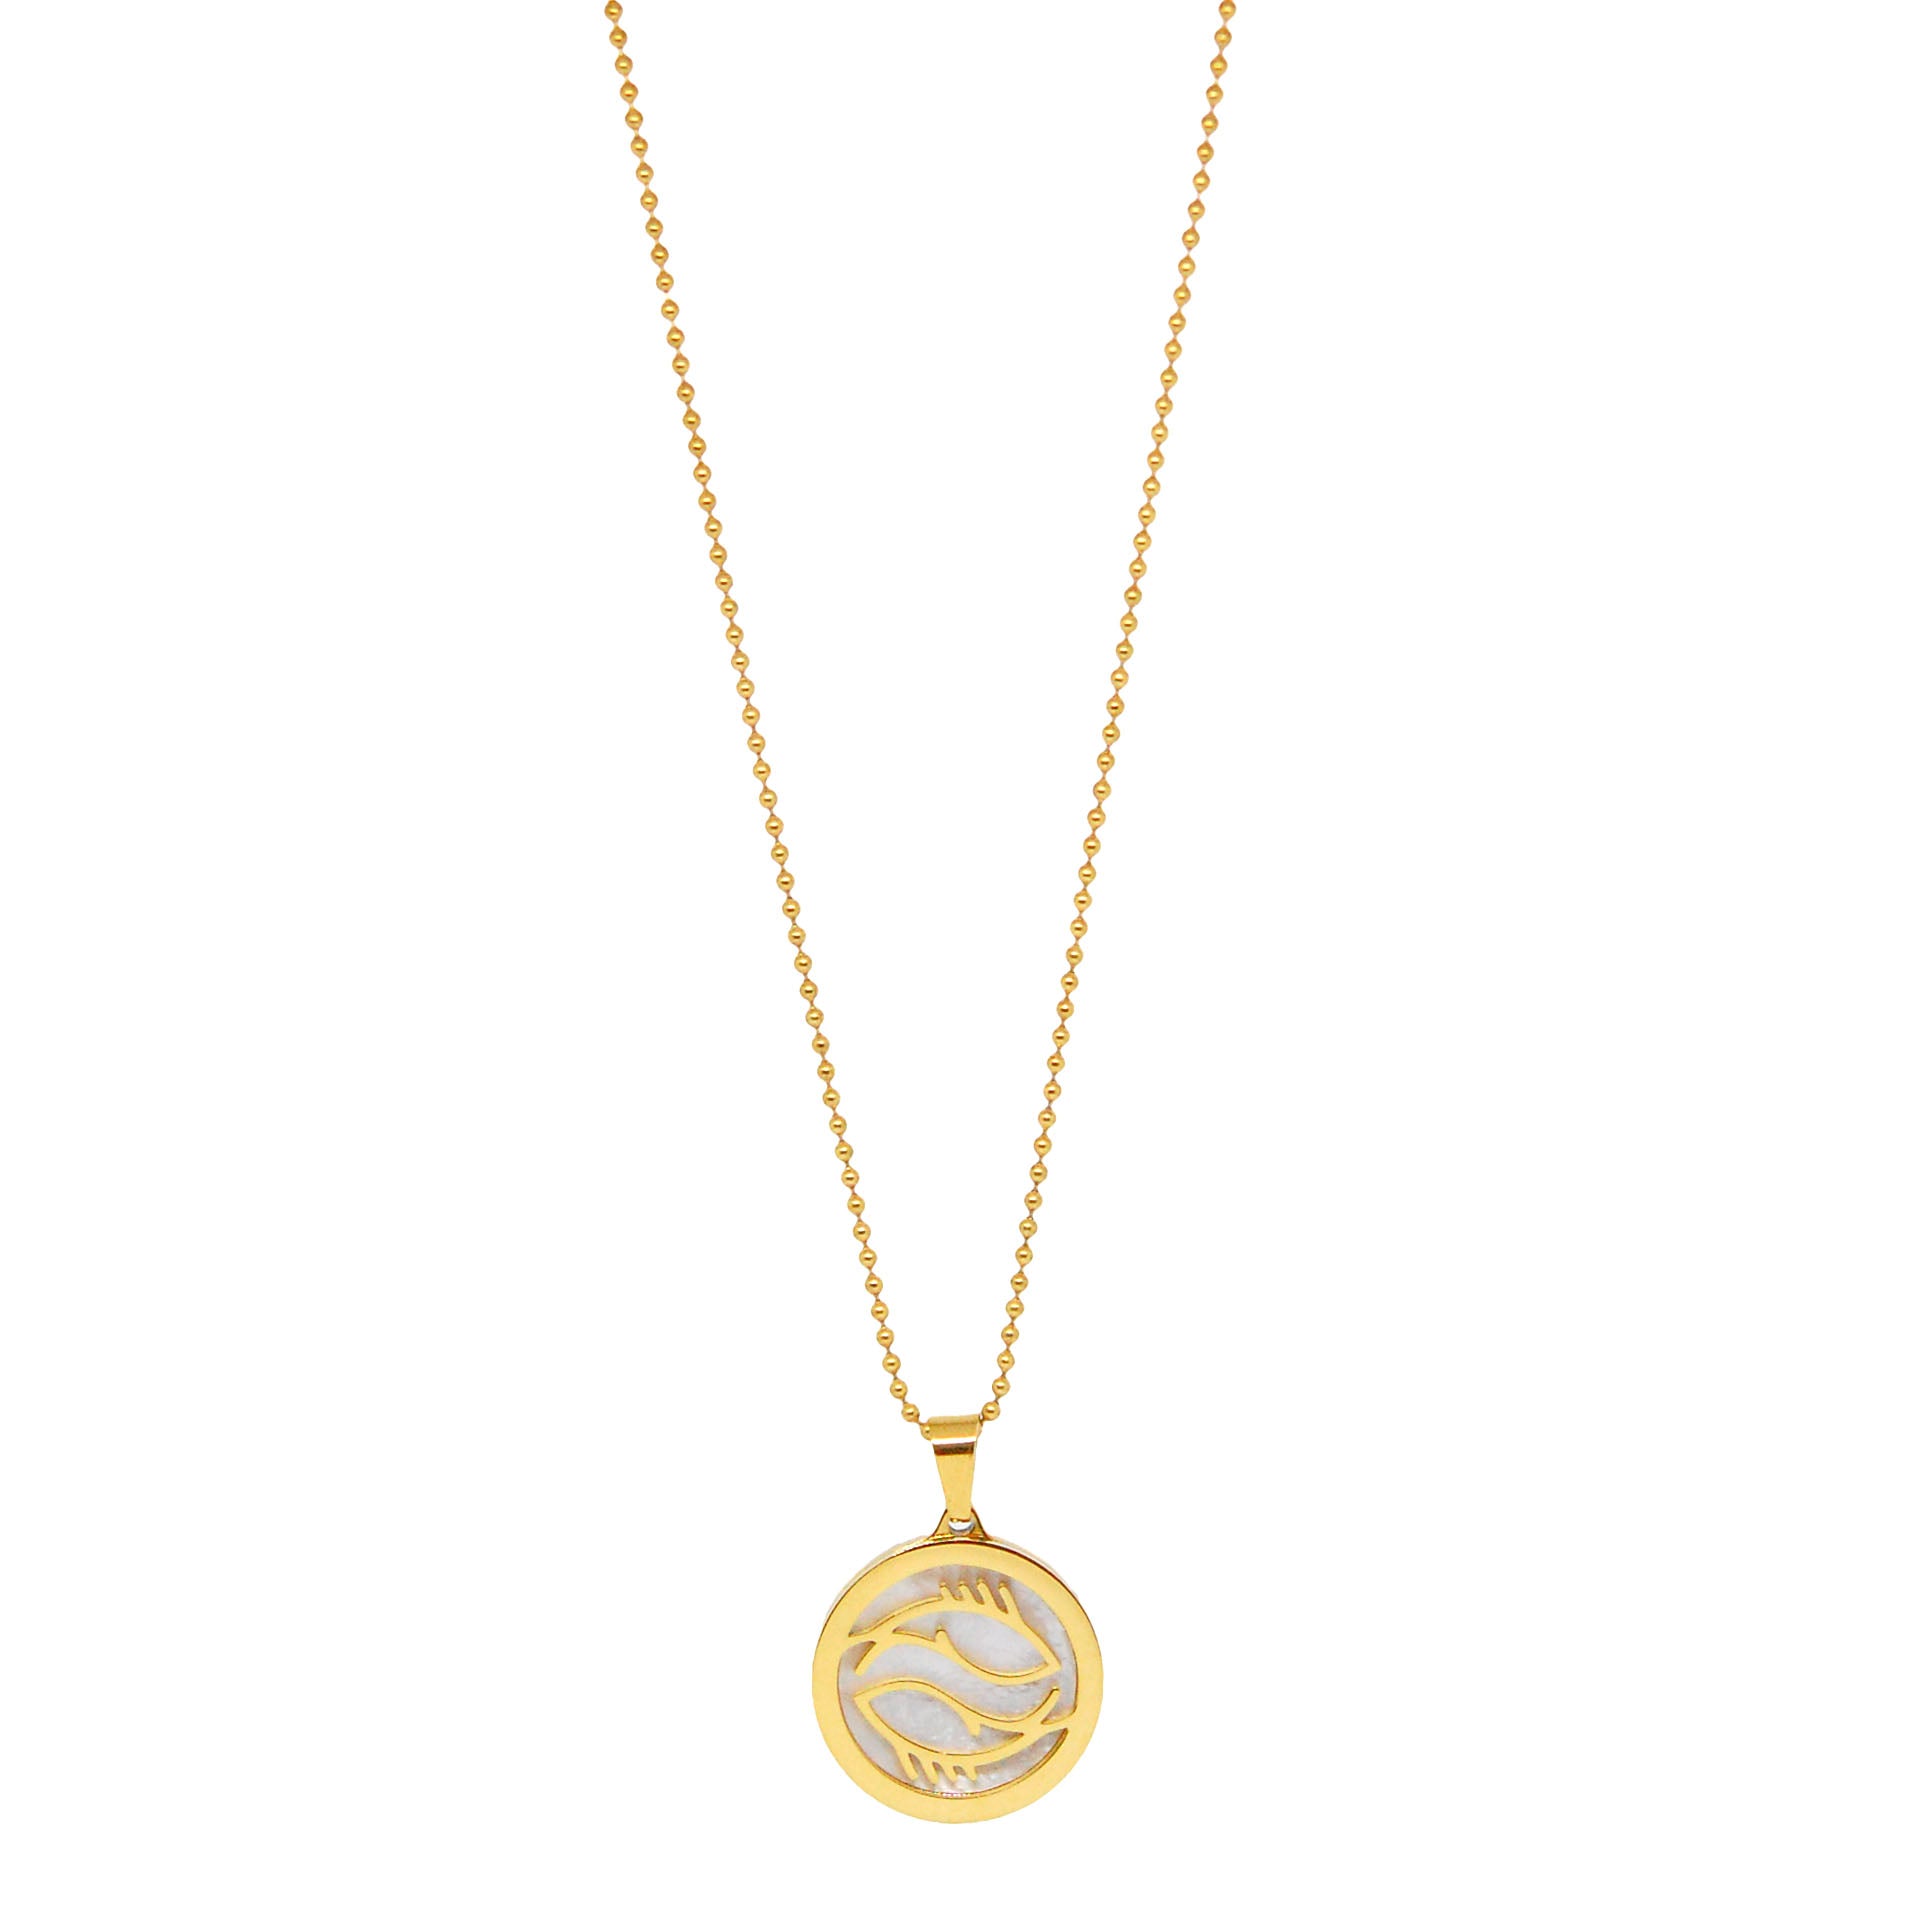 ESN 7964: All IPG Mop Pisces Zodiac Necklace w/ 18" IPG Ball Chain